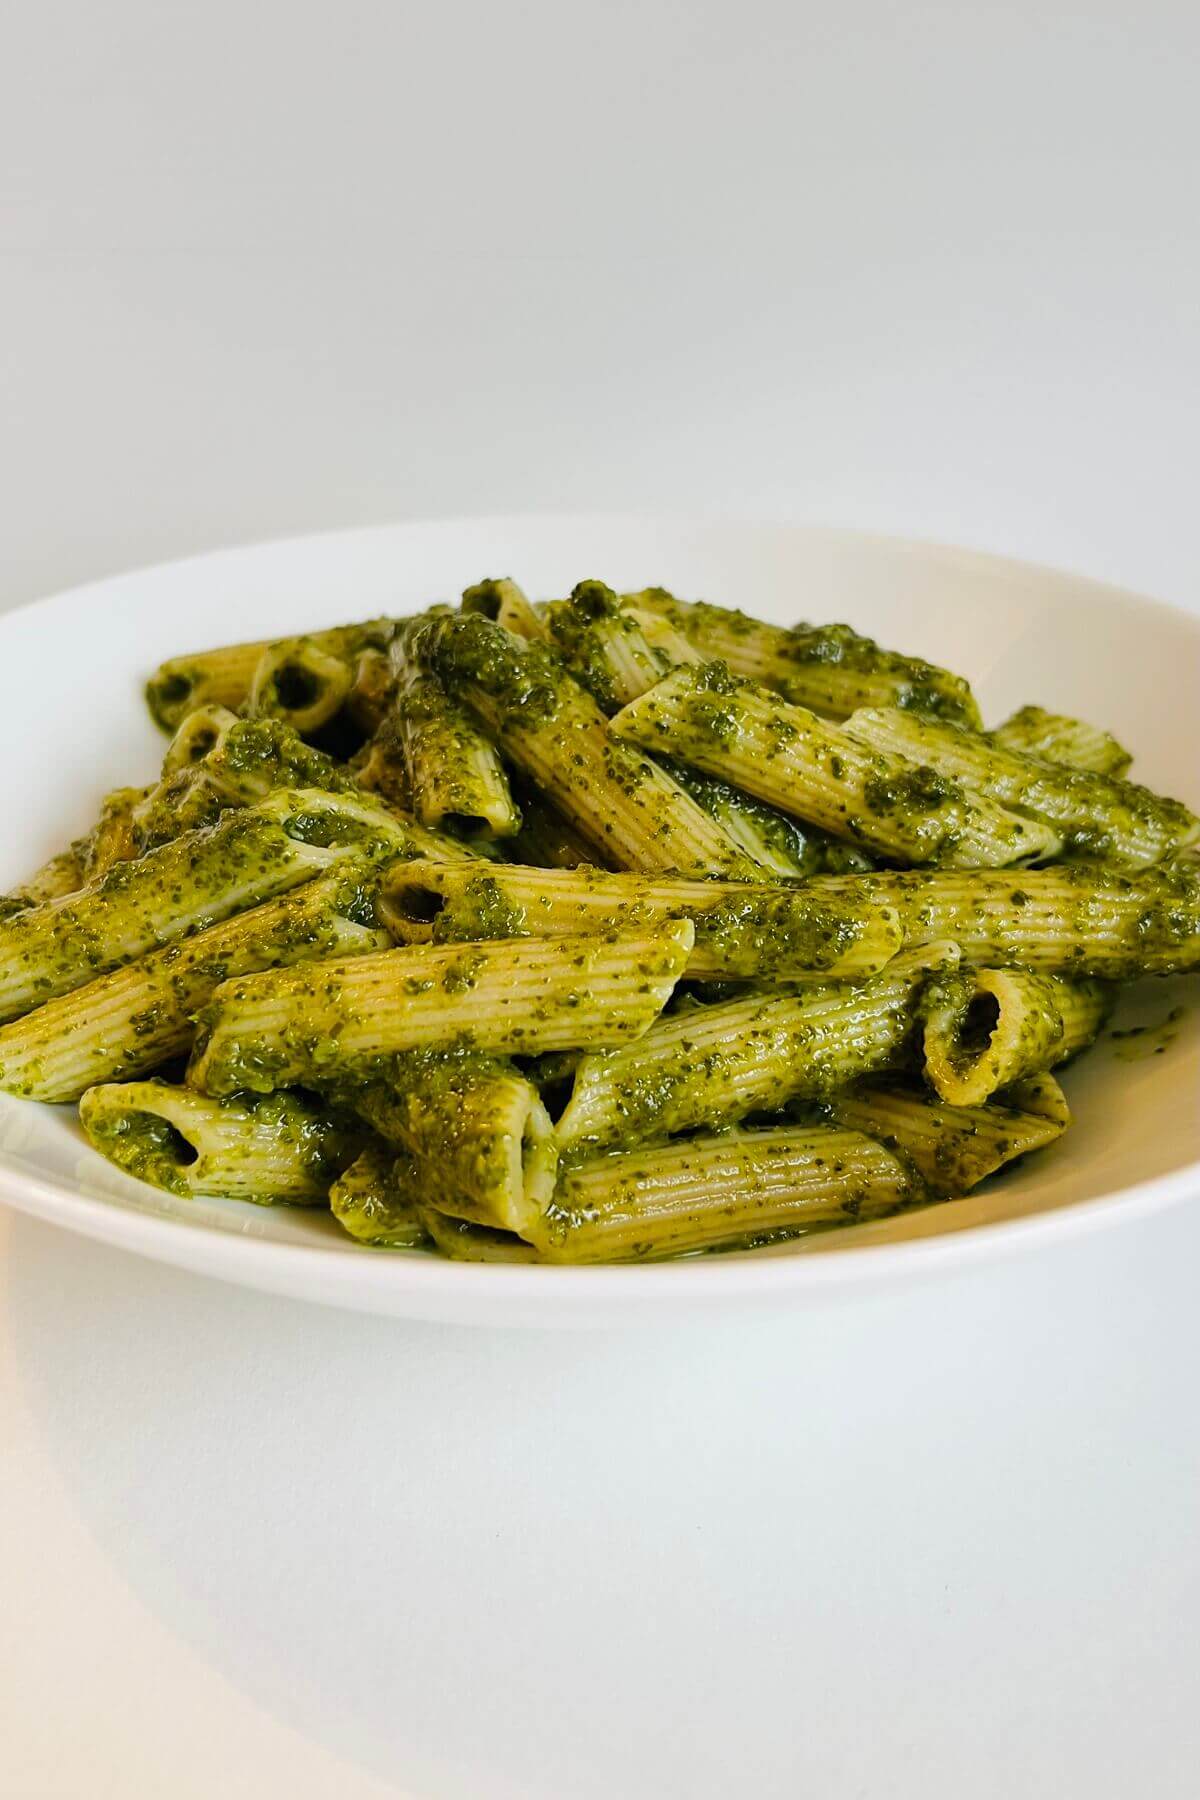 A bowl of penne pasta in a green sauce.